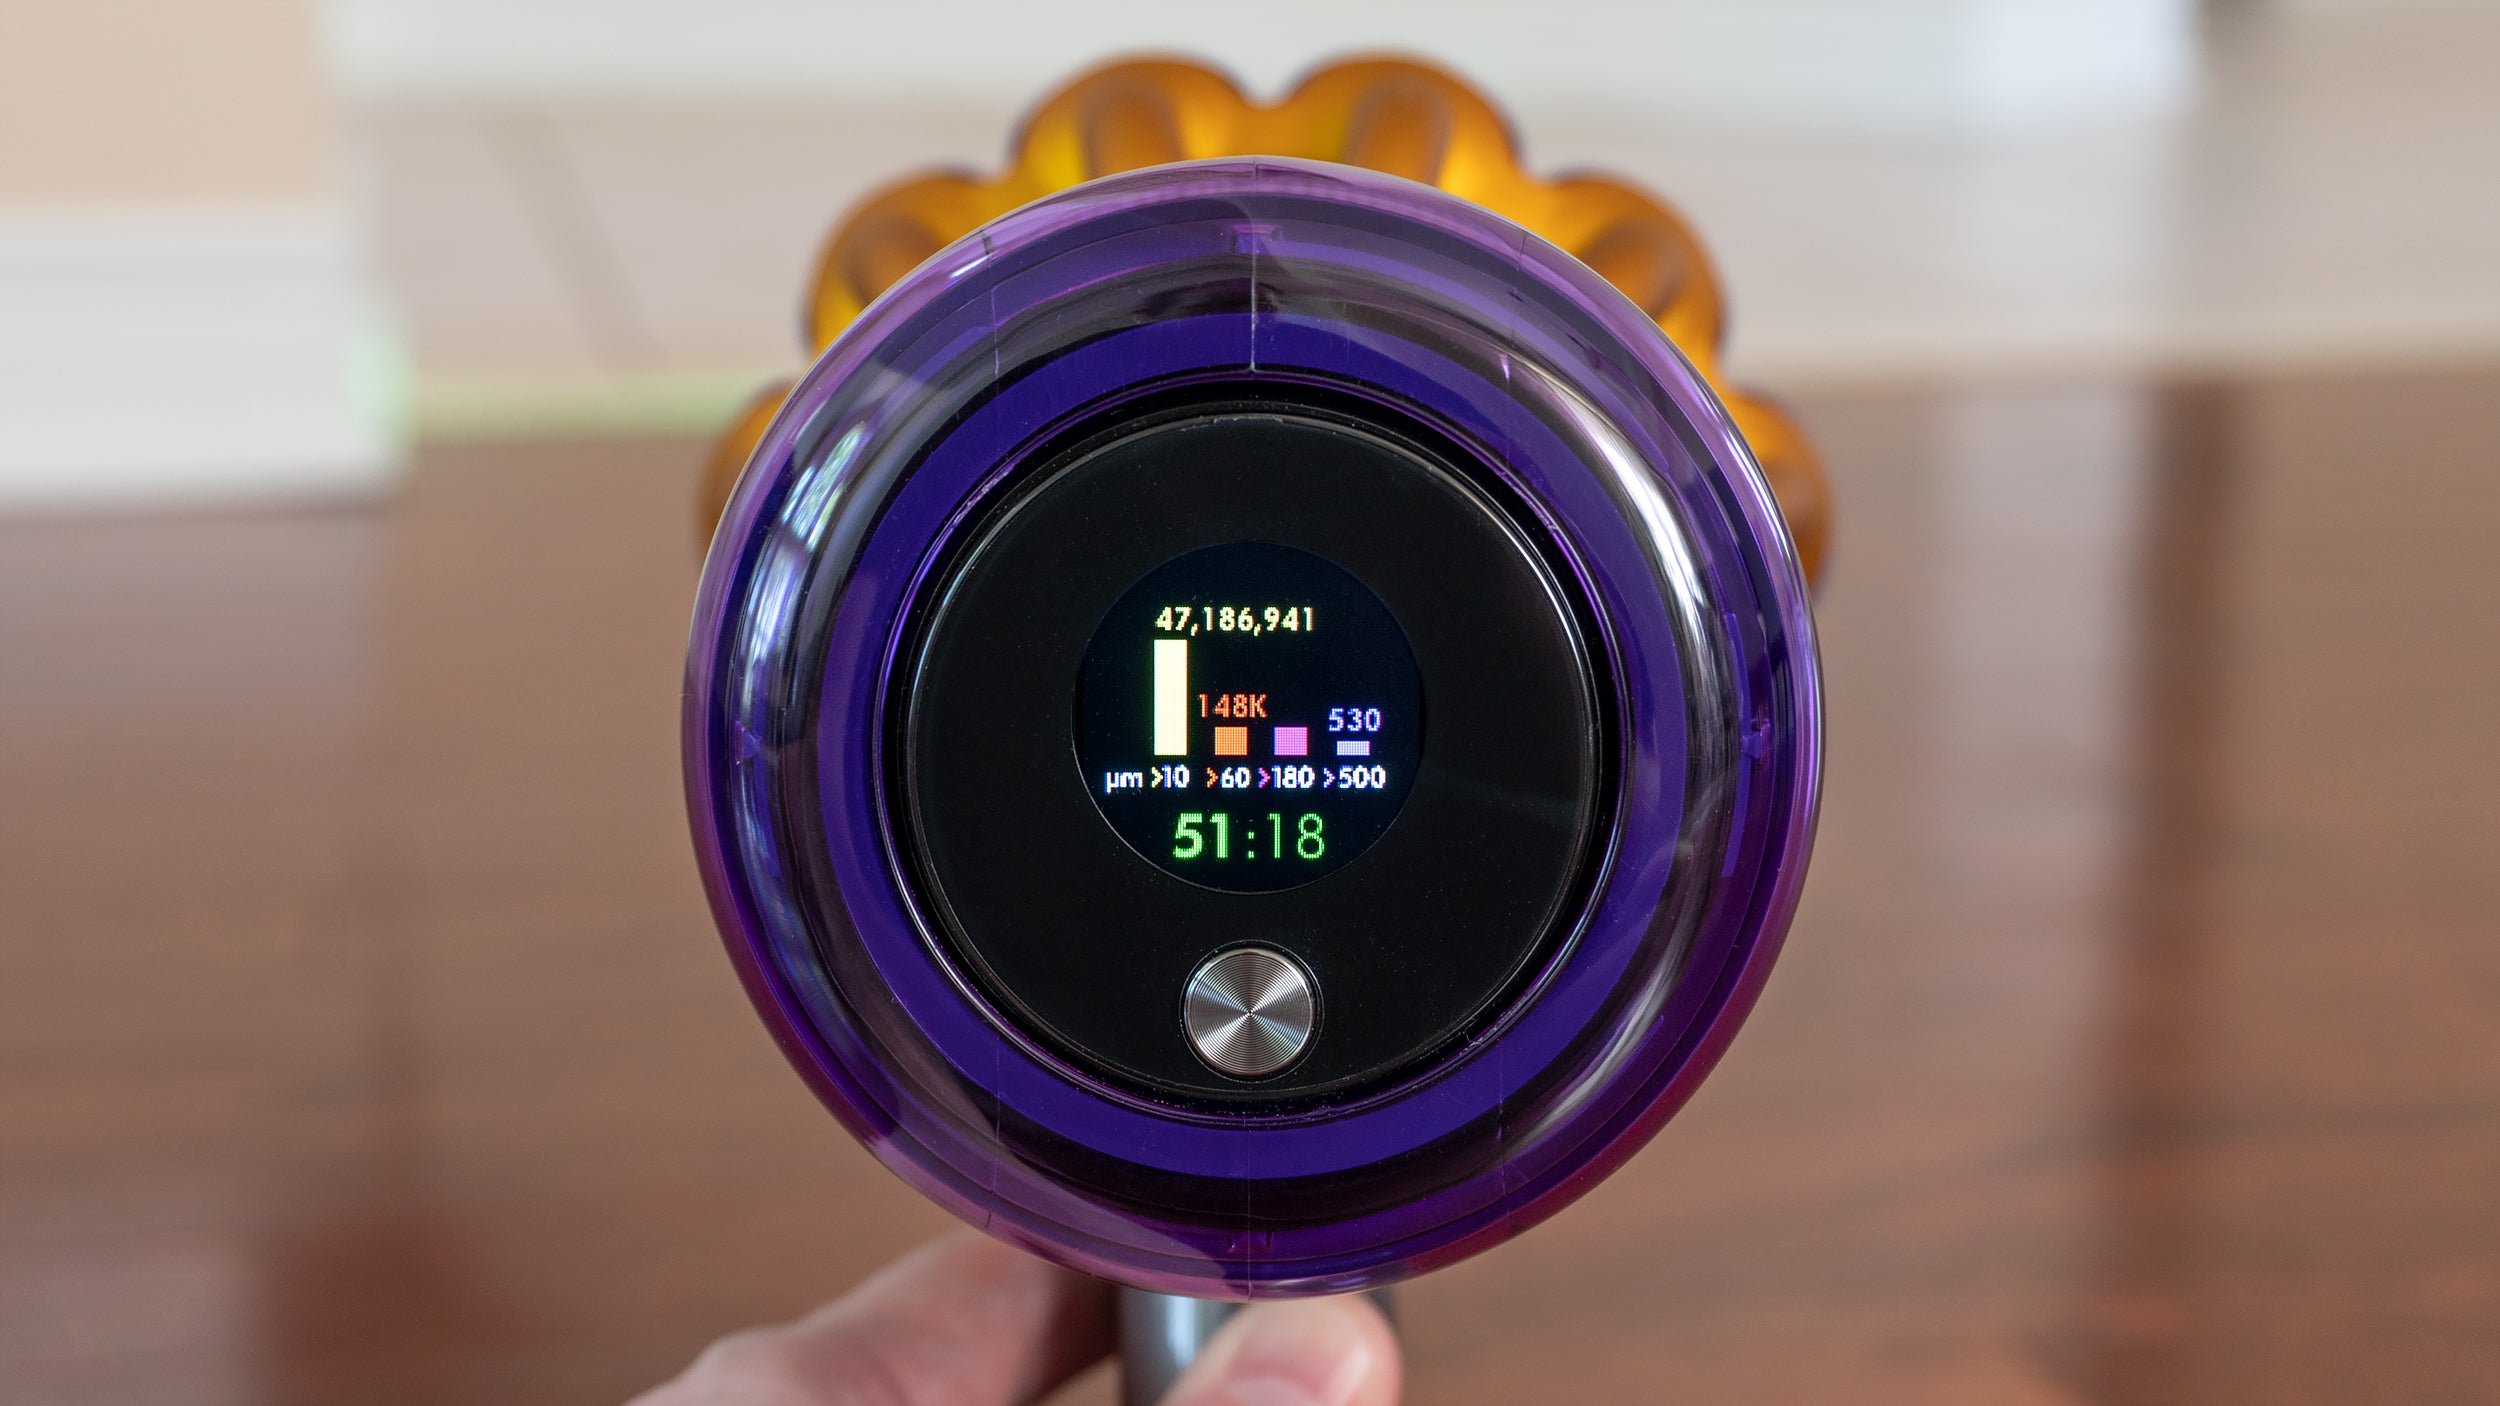 Using a newly added sensor, the V15 Detect can measure the size and number of particles being sucked up, allowing it to more intelligently adjust its suction power in Auto mode. (Photo: Andrew Liszewski/Gizmodo)